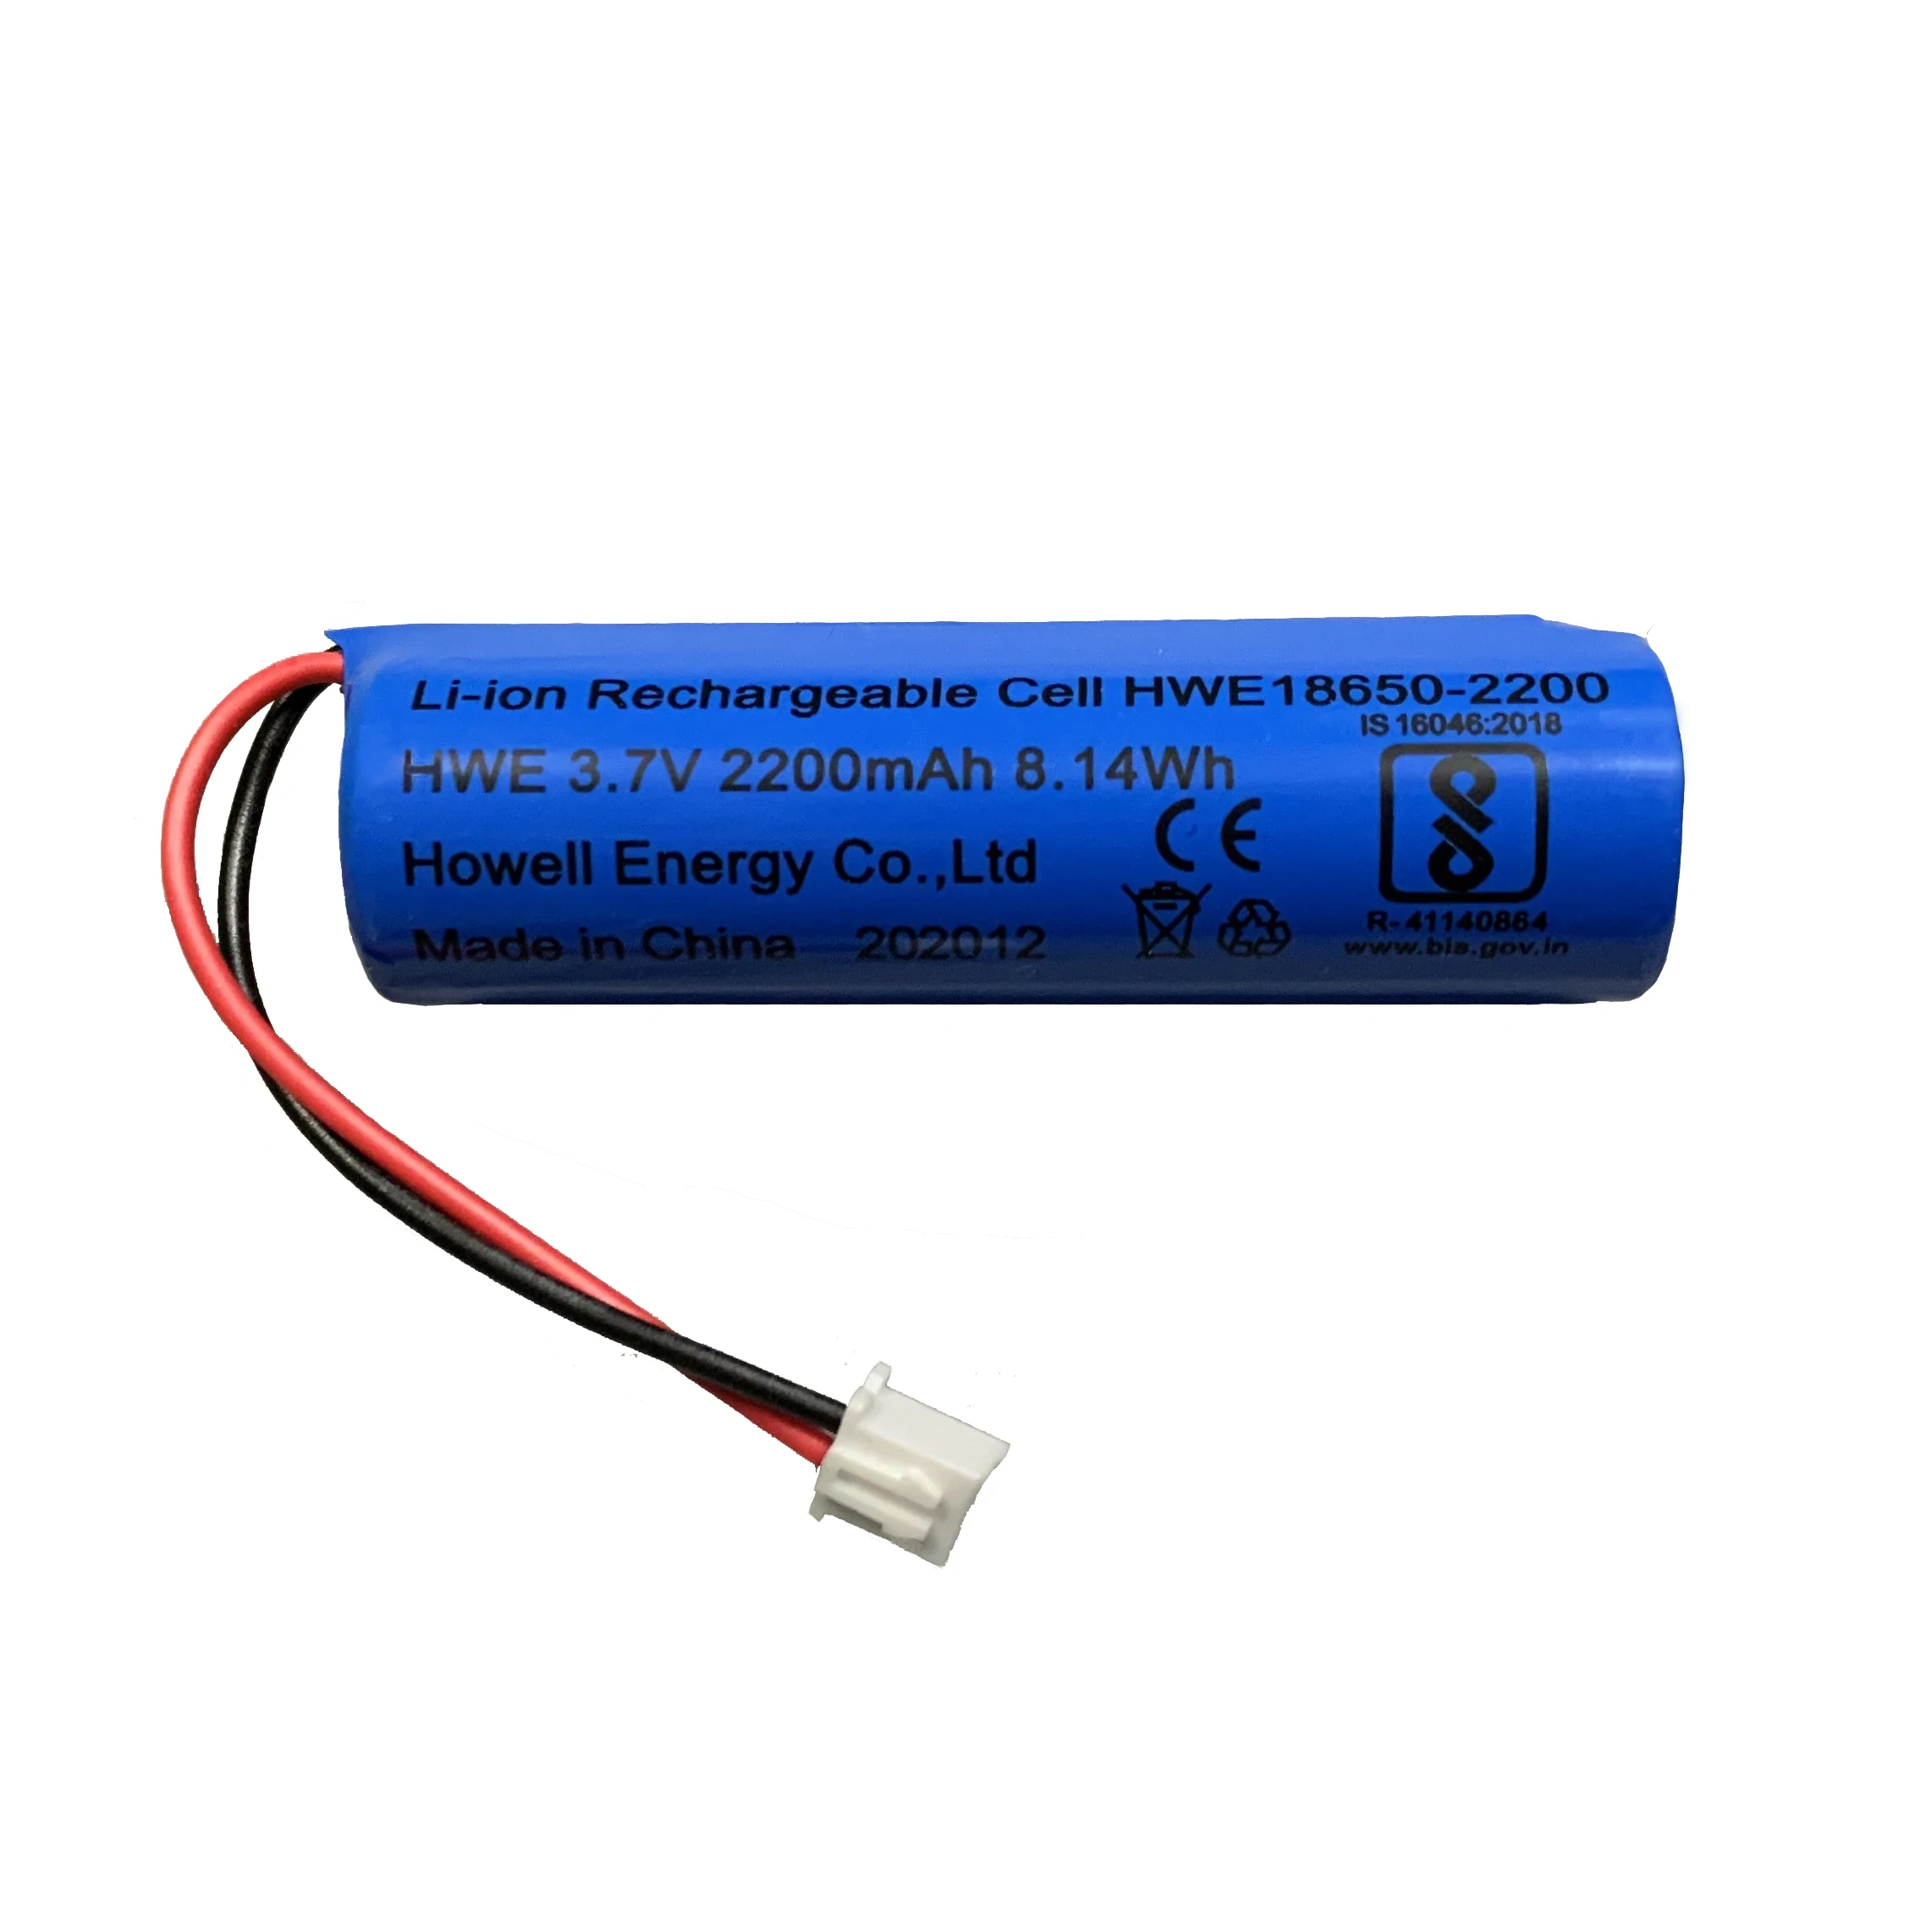 solidariteit lip beproeving Bis Ce Rohs Certified Cylindrical 18650 Li Ion Battery 3.7v 2200mah With  Wire And Connector - Buy 18650 Li-ion Battery,18650 1800mah 3.7v Battery,Cylindrical  18650 Li-ion Battery Product on Alibaba.com